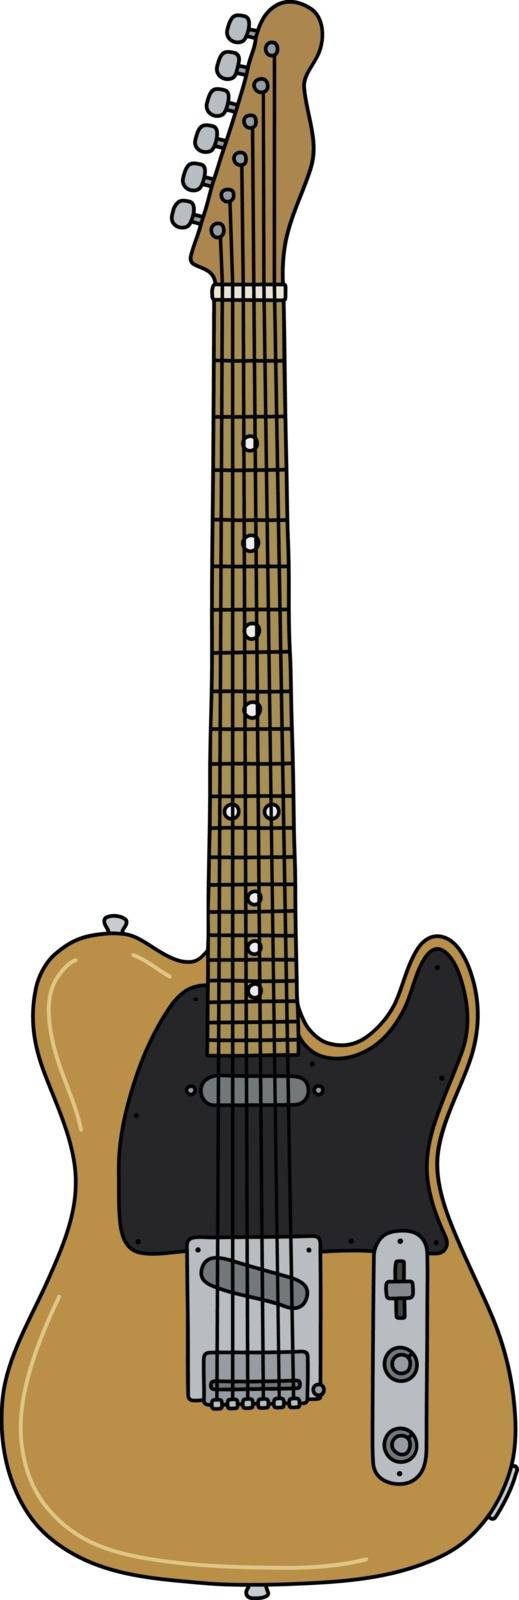 The classic electric guitar by vostal